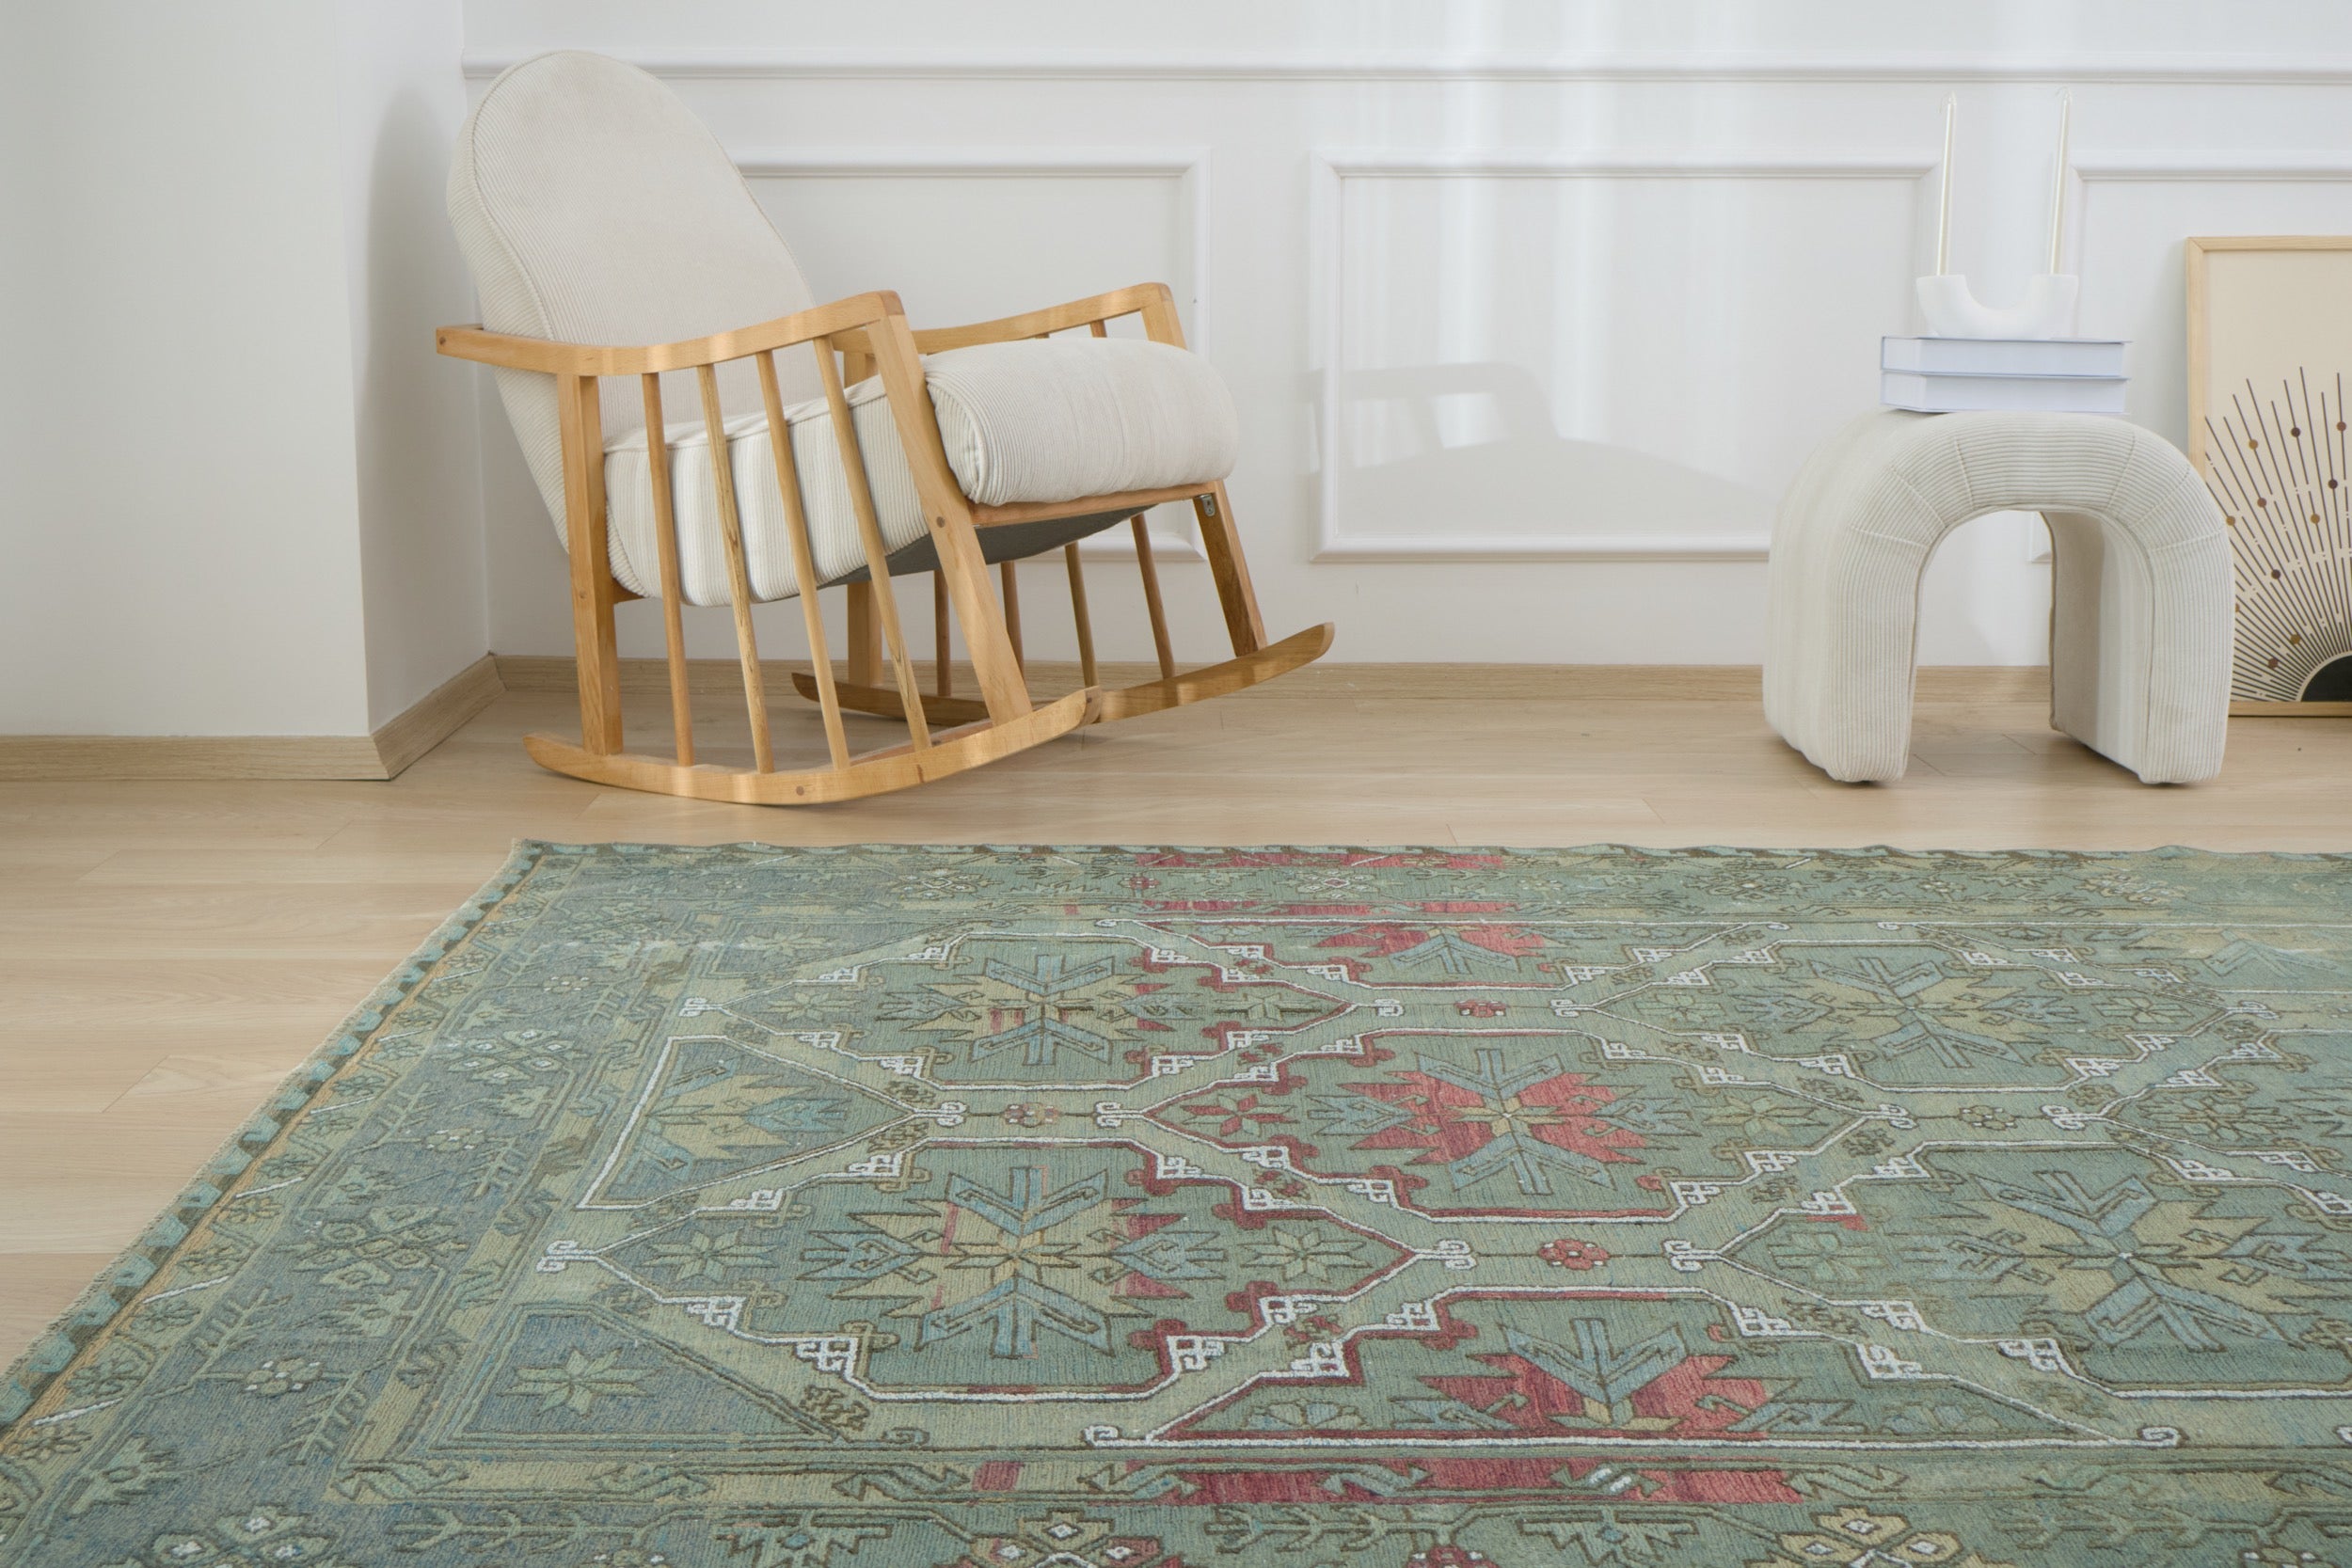 The Artisanal Beauty of Kylie - A Wool and Cotton Masterpiece | Kuden Rugs